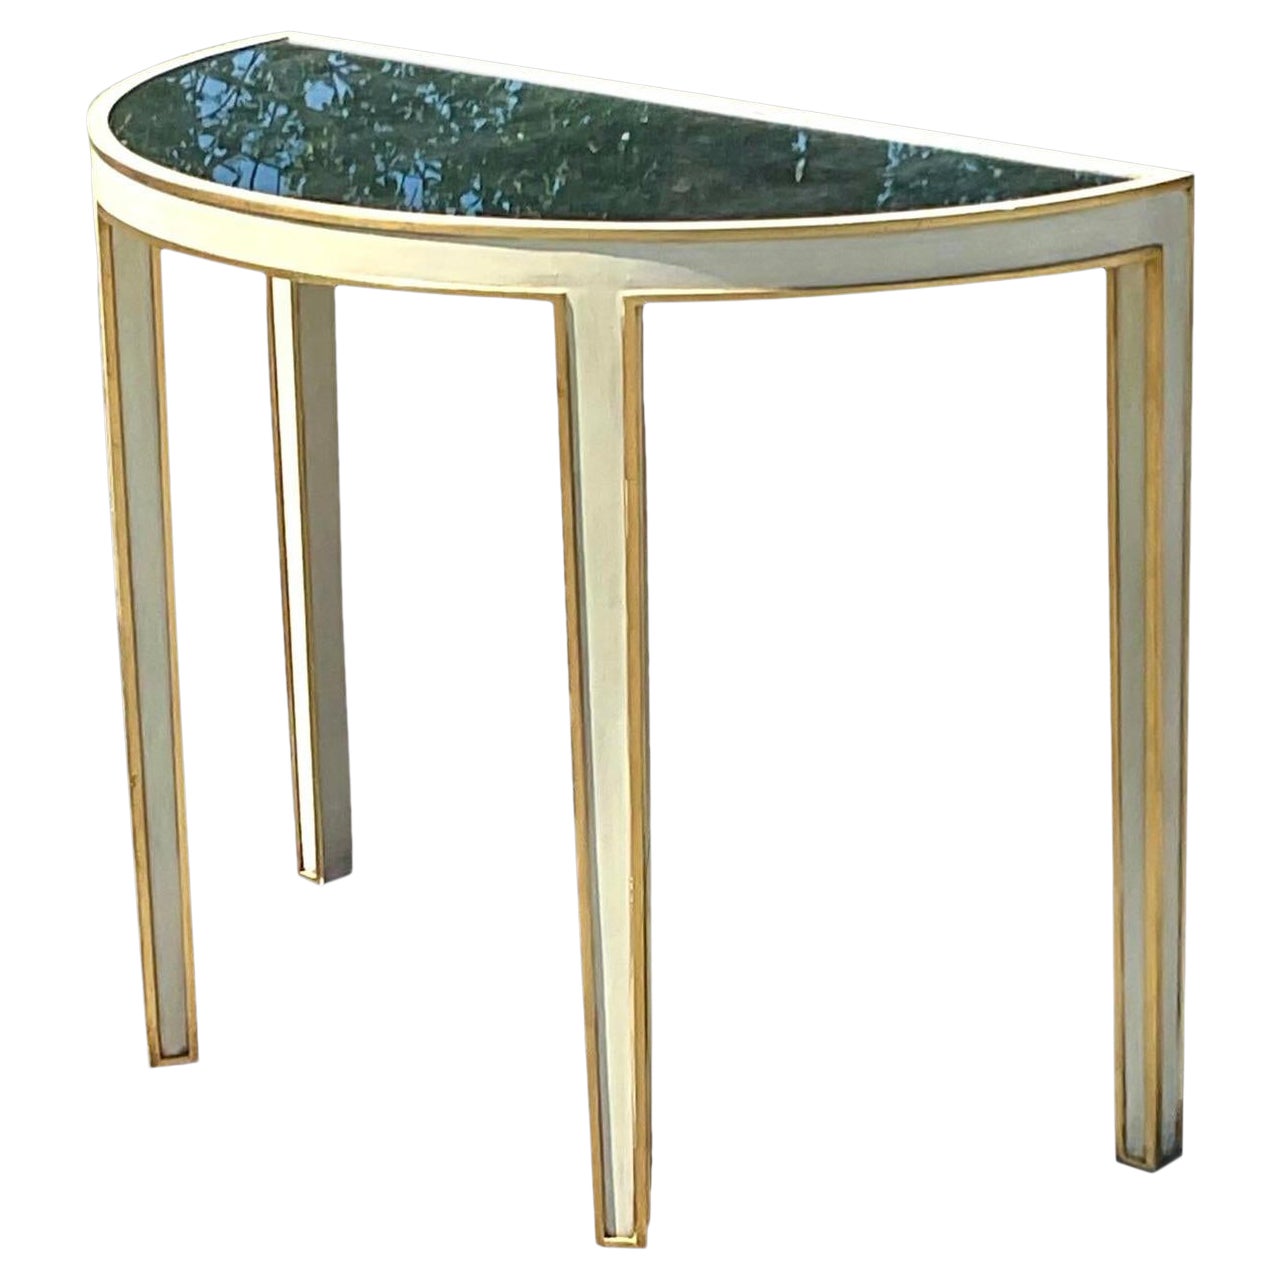 Late 20th Century Vintage Regency Modern Gilt Tipped Demi-Lune Hall Table For Sale